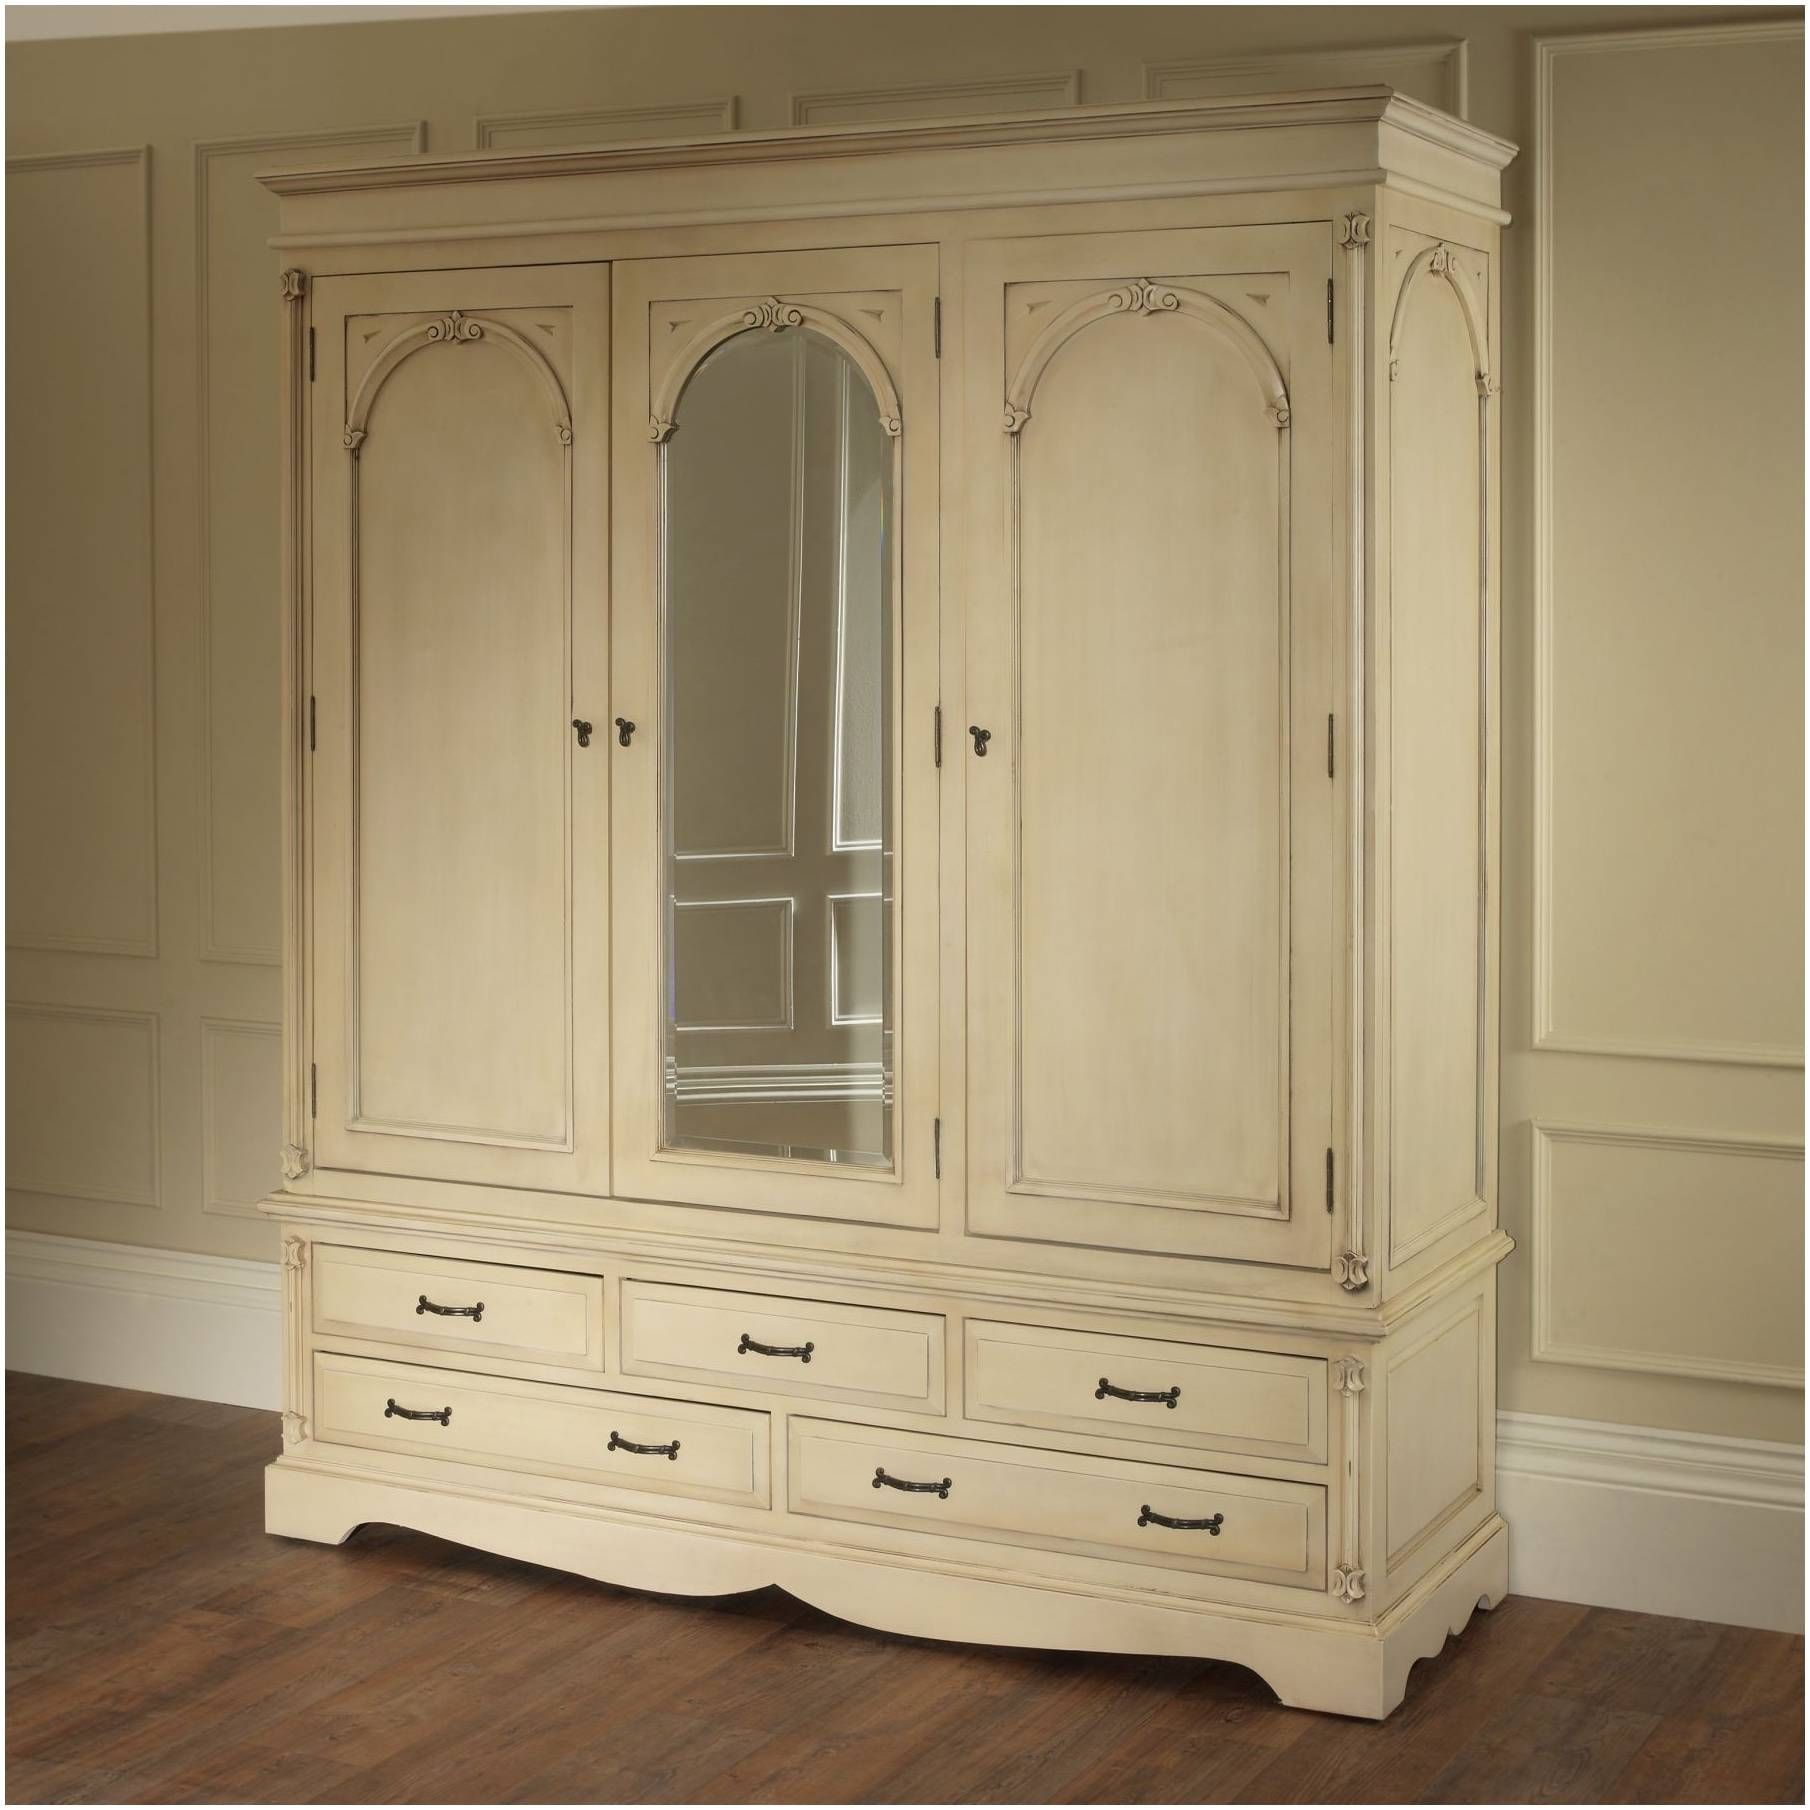 Armoire Enchanting Closet Design For Dazzling Bedroom Closets With Regard To Antique Style Wardrobes (View 5 of 15)